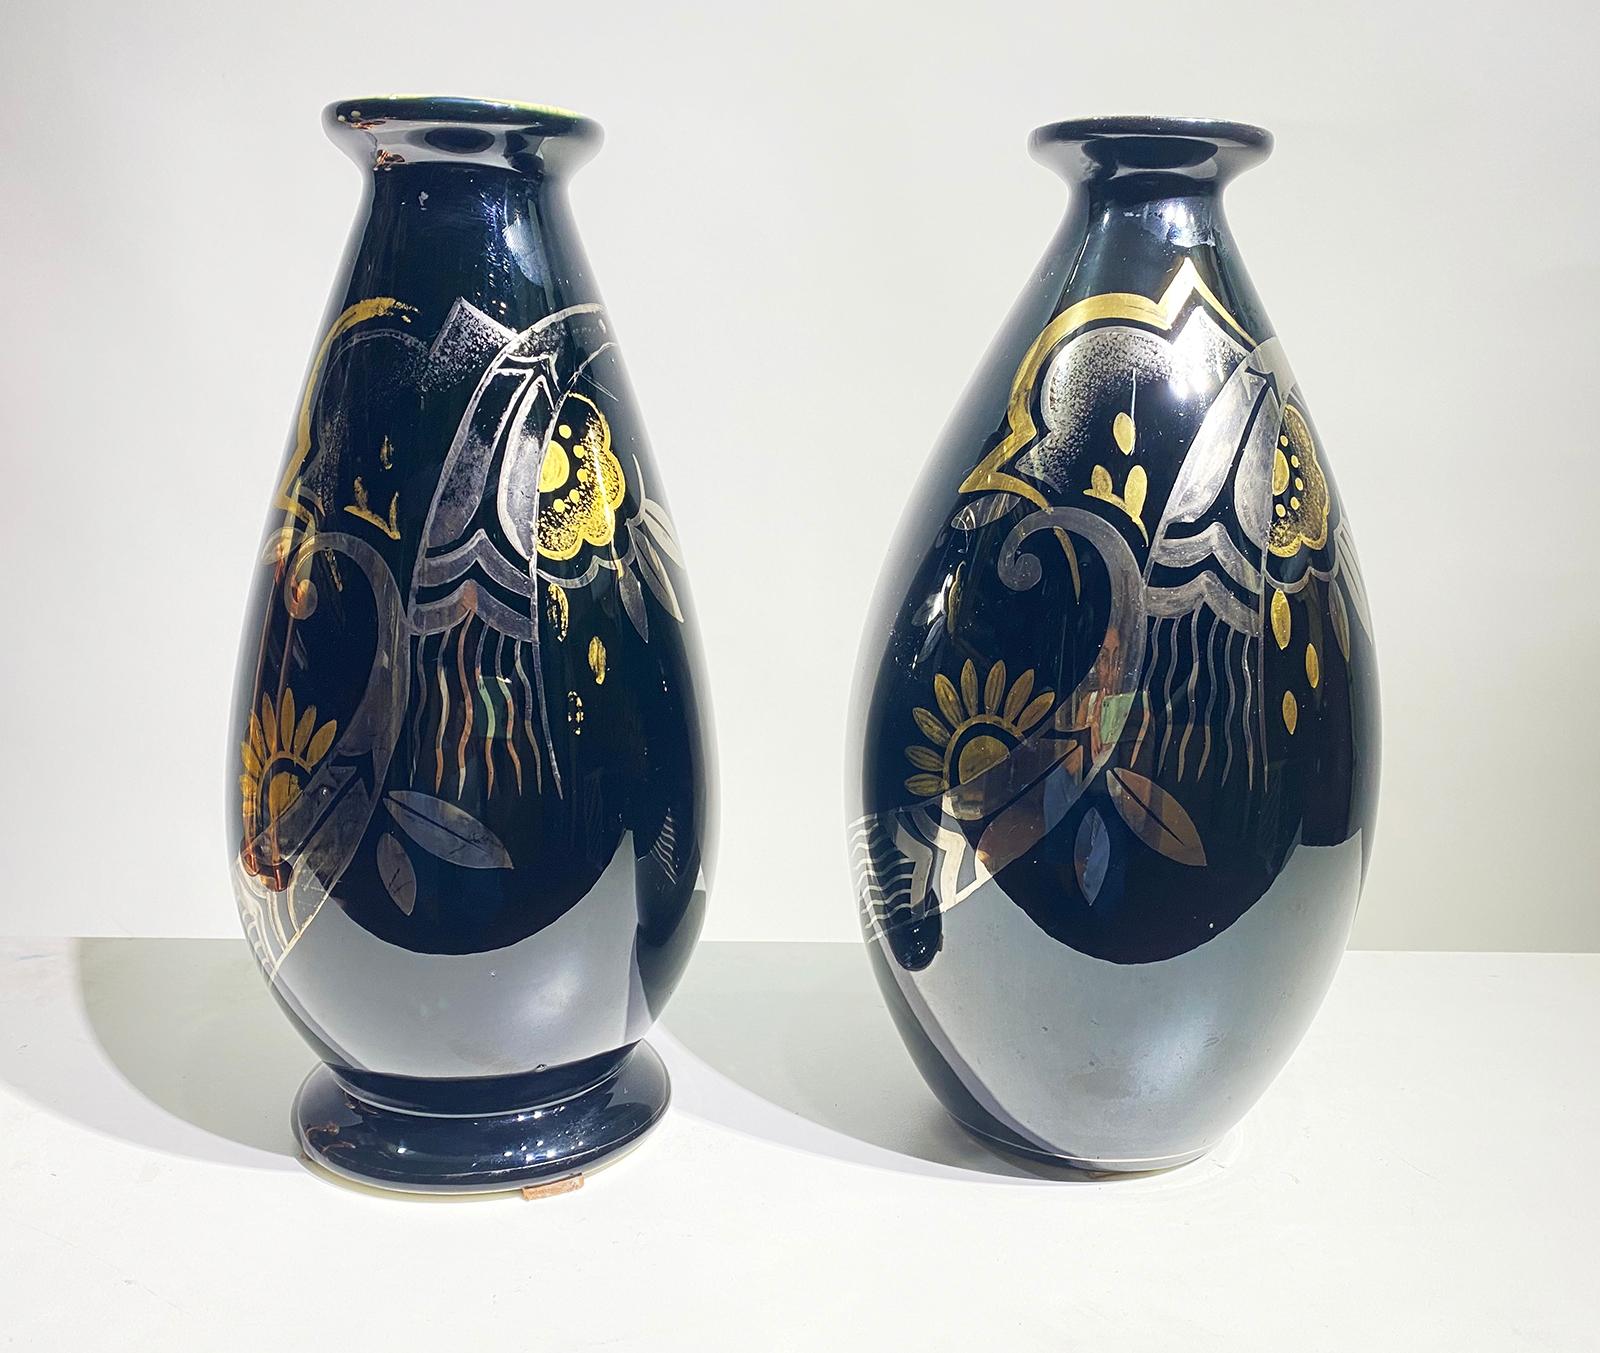 False pair of ceramic vases with Art Deco pattern in silver and gold on a black shiny glaze by Boch Frères, La Louvière Belgium, 1931-1932.
Dimensions of Vase 1 : Height 33 cm x Diameter 17 cm
Dimensions of Vase 2 : Height 33 cm x Diameter 19 cm.